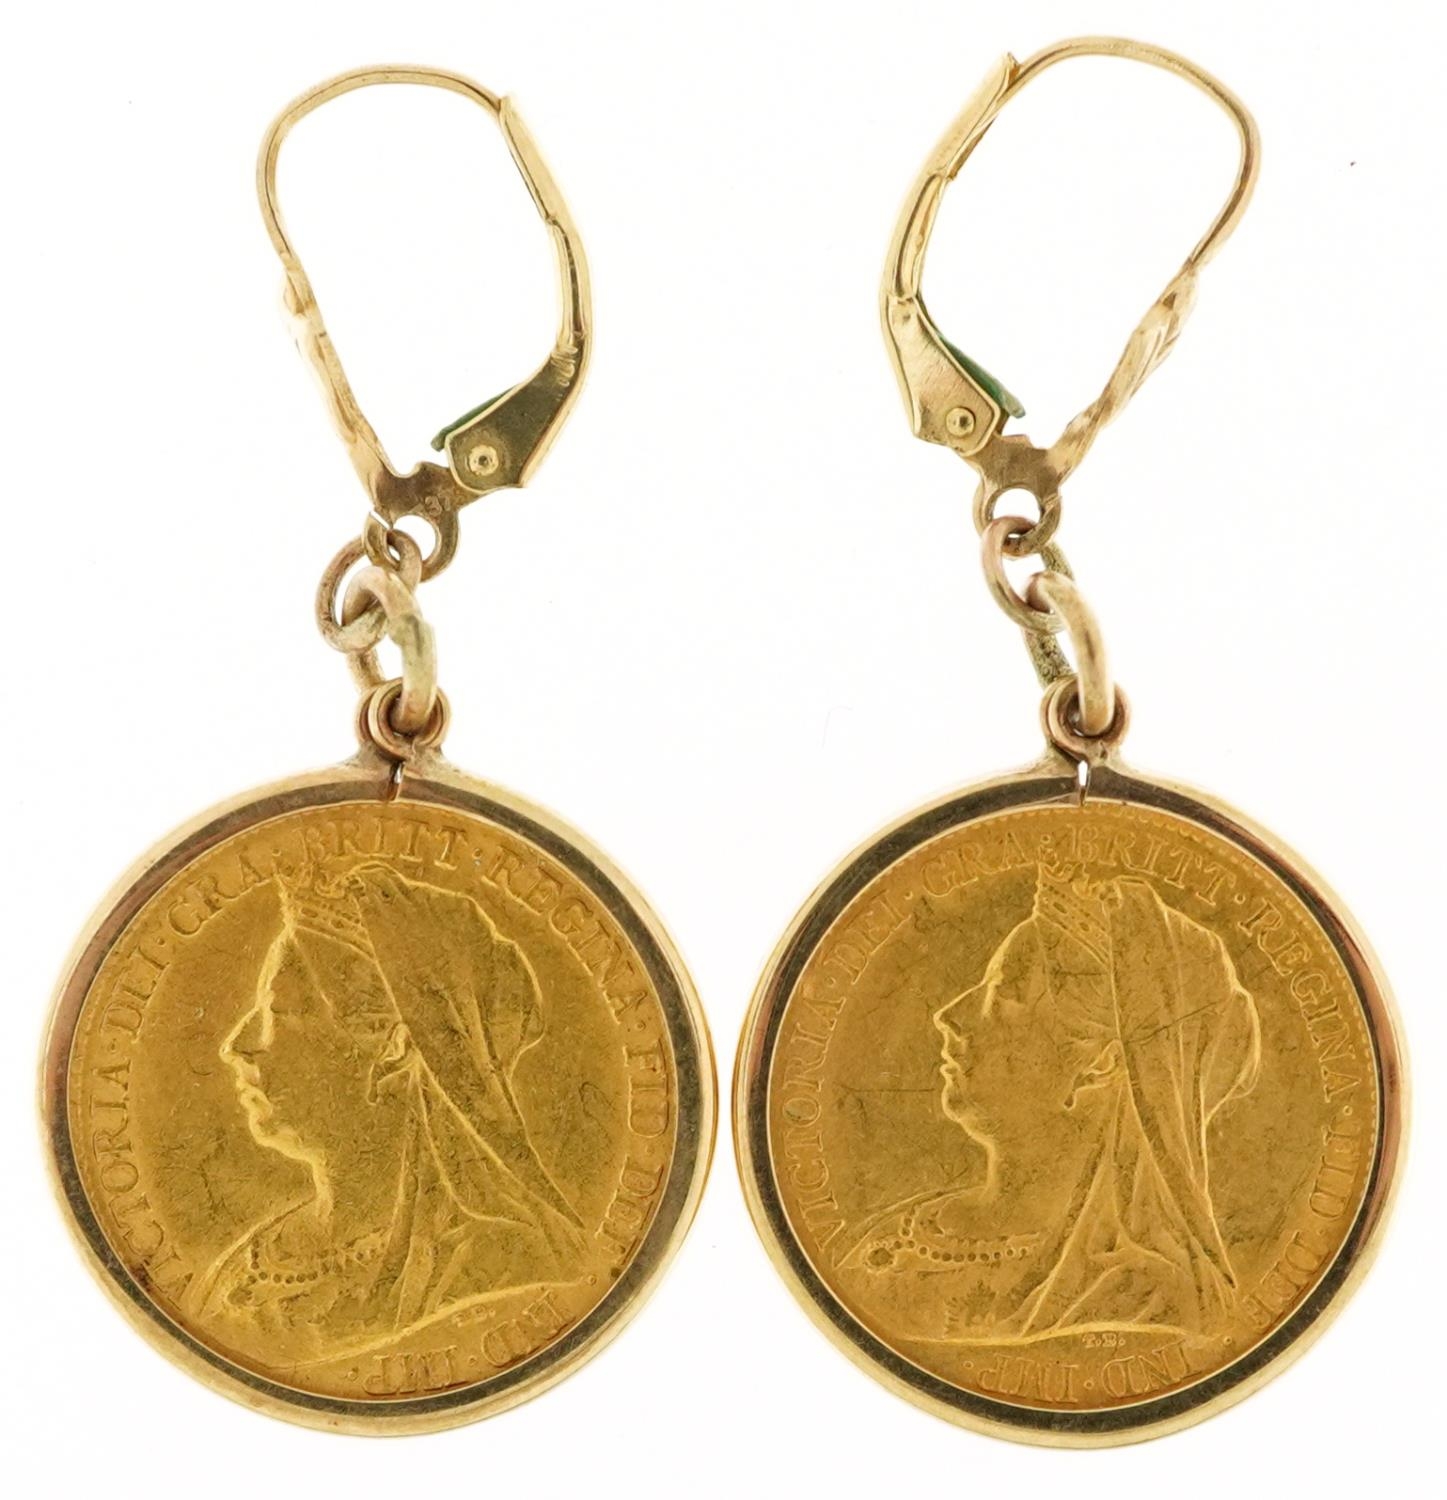 Pair of Queen Victoria 1899 gold half sovereigns housed in 9ct gold earring mounts, total 10.2g - Image 2 of 3